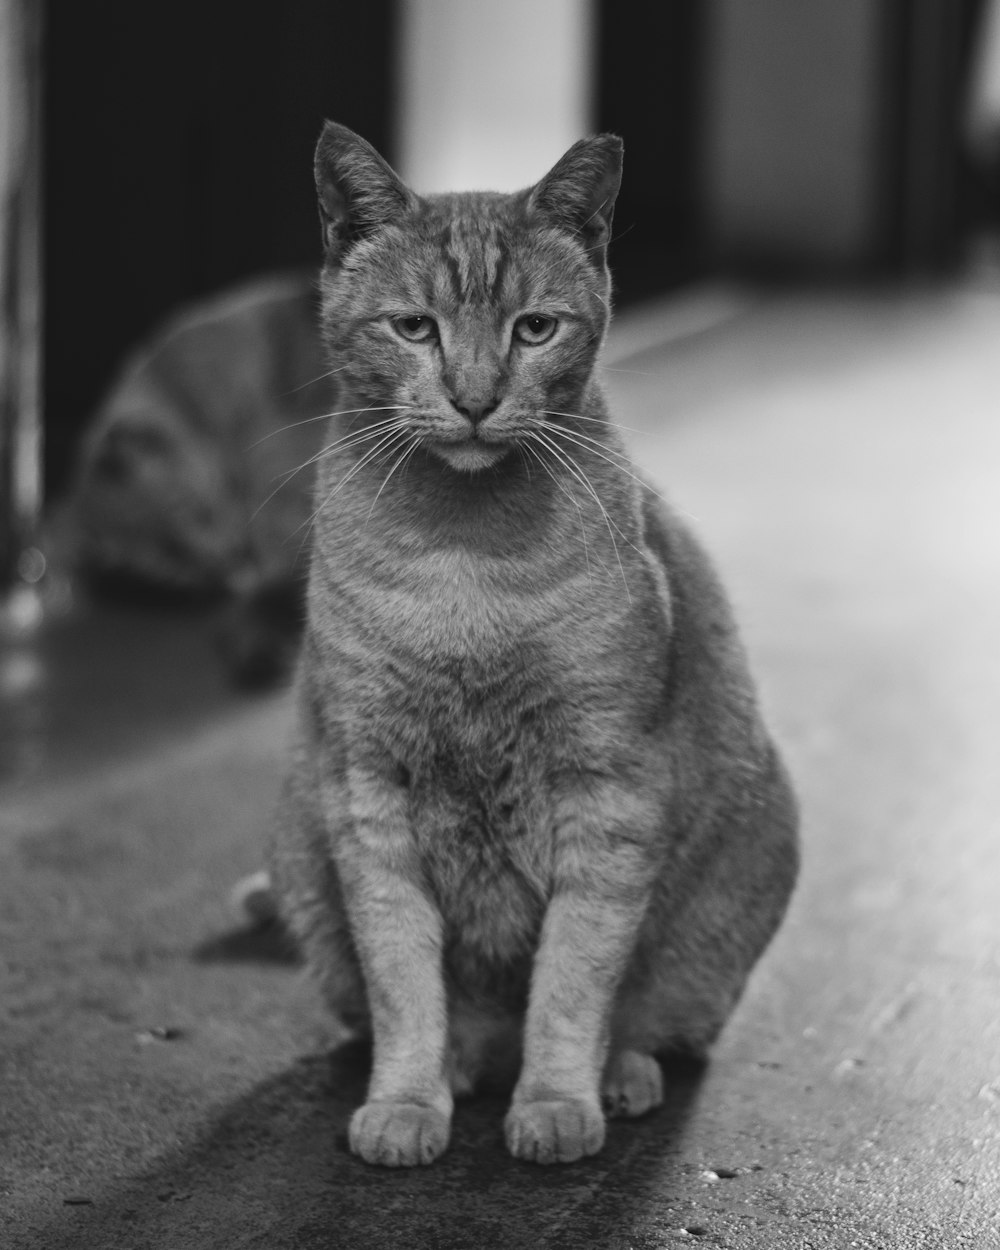 a black and white photo of a cat sitting on the floor